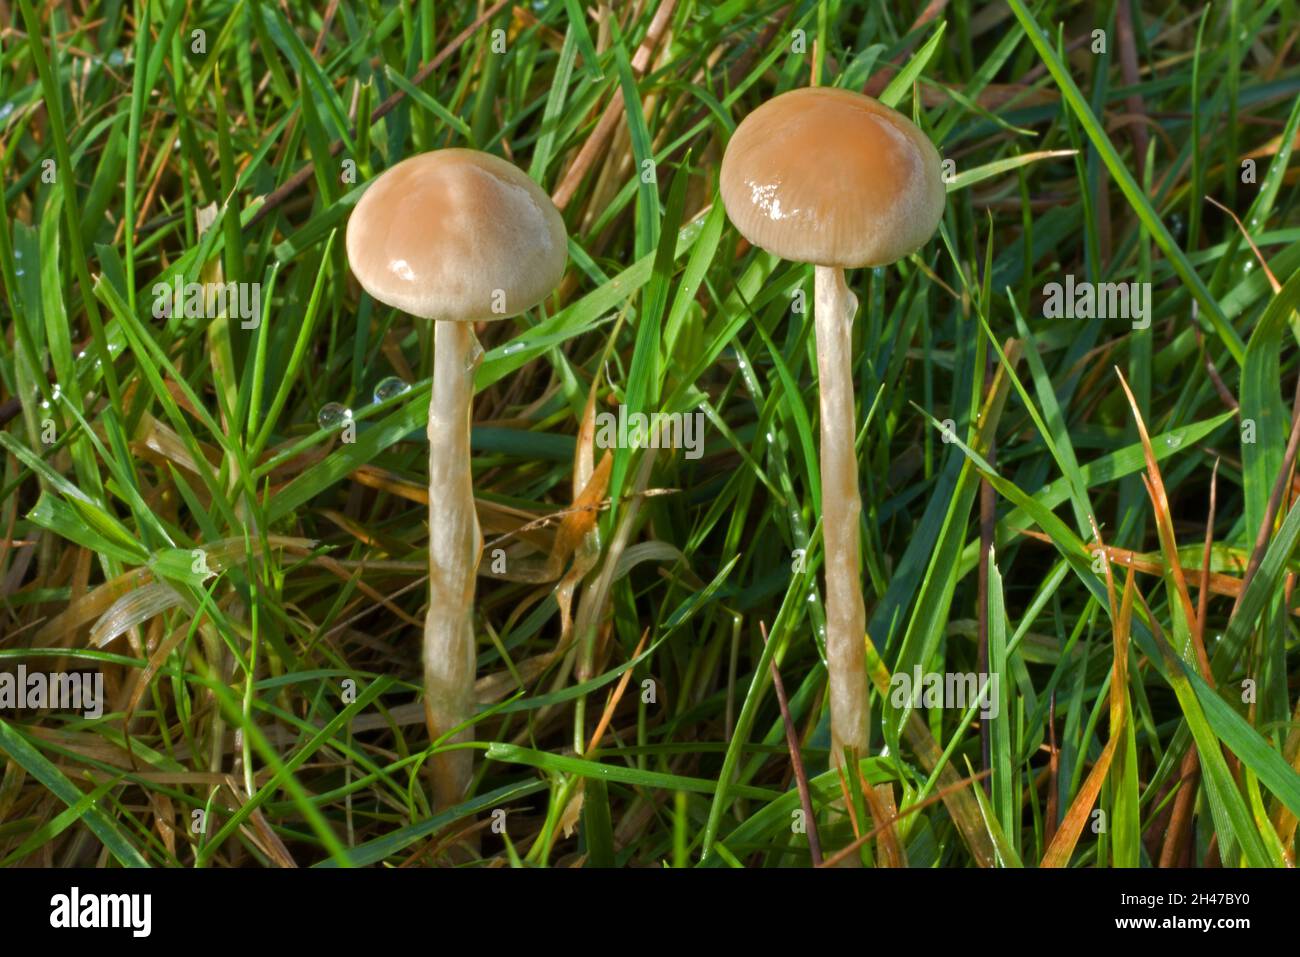 Protostropharia semiglobata (dung roundhead) is found on dung, soil containing manure and on lawns. It is widespread with a cosmopolitan distribution. Stock Photo